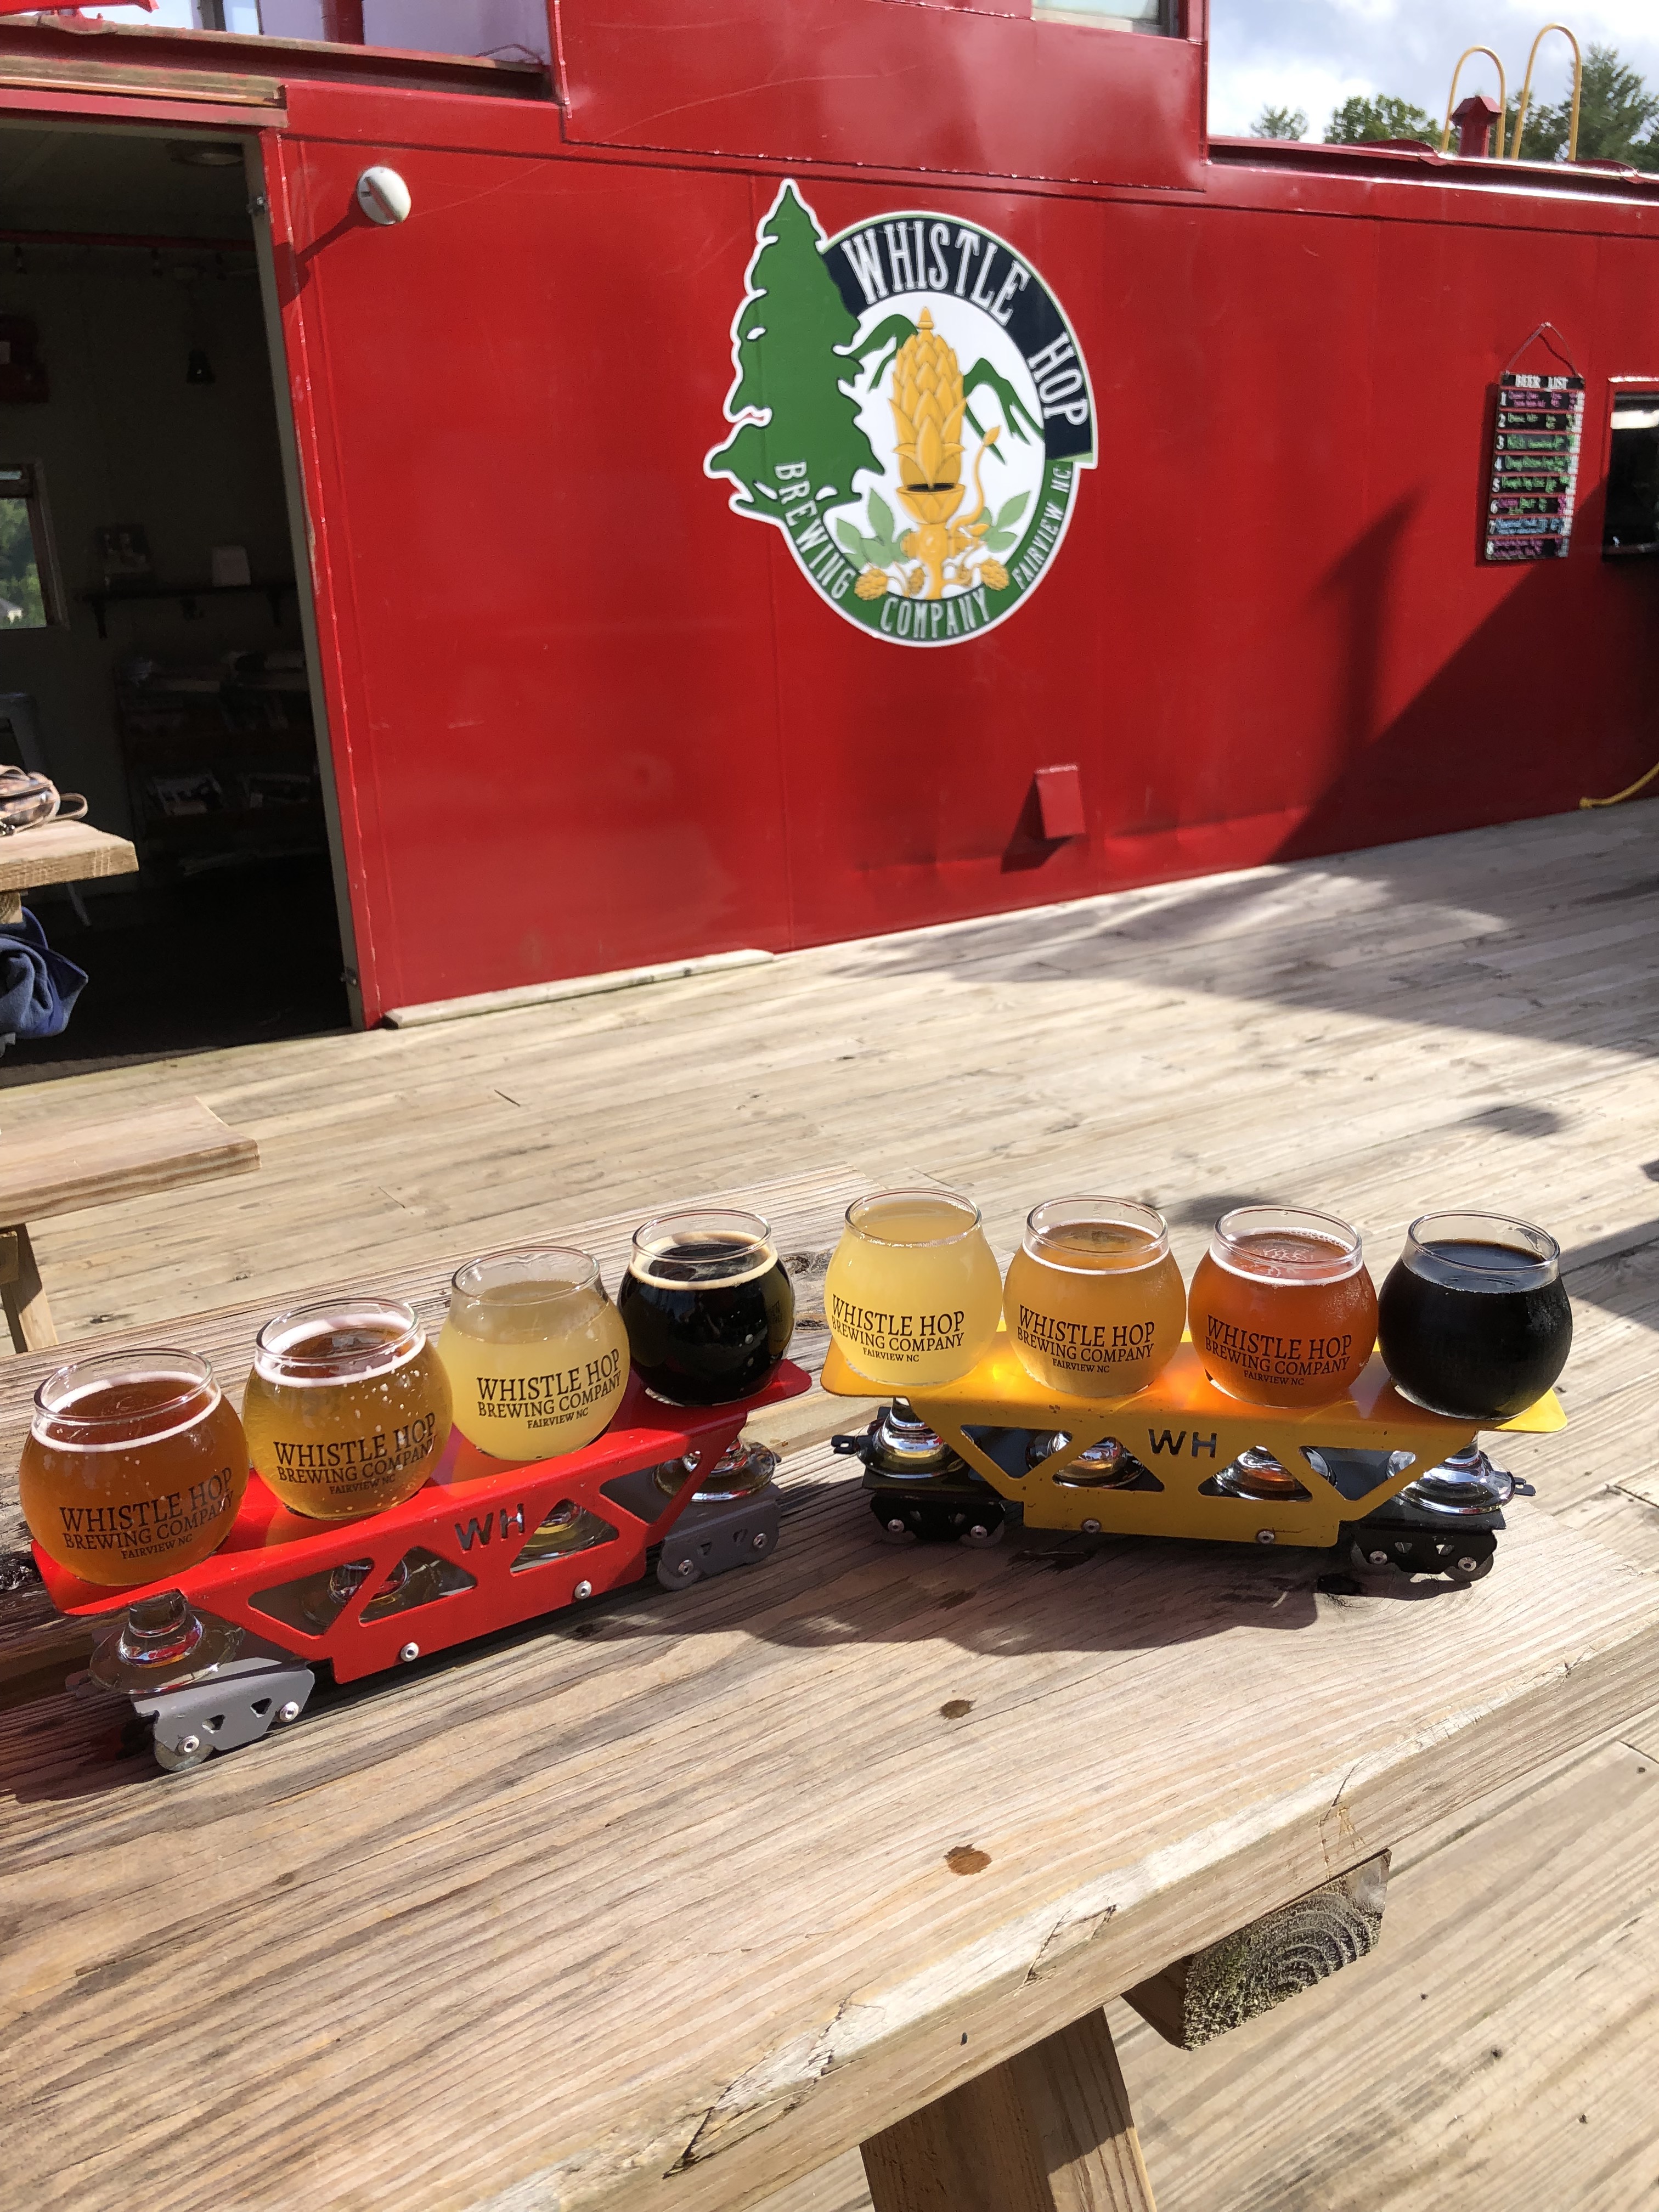 Whistle Hop Brewing Company in Fairview, NC just outside of Asheville